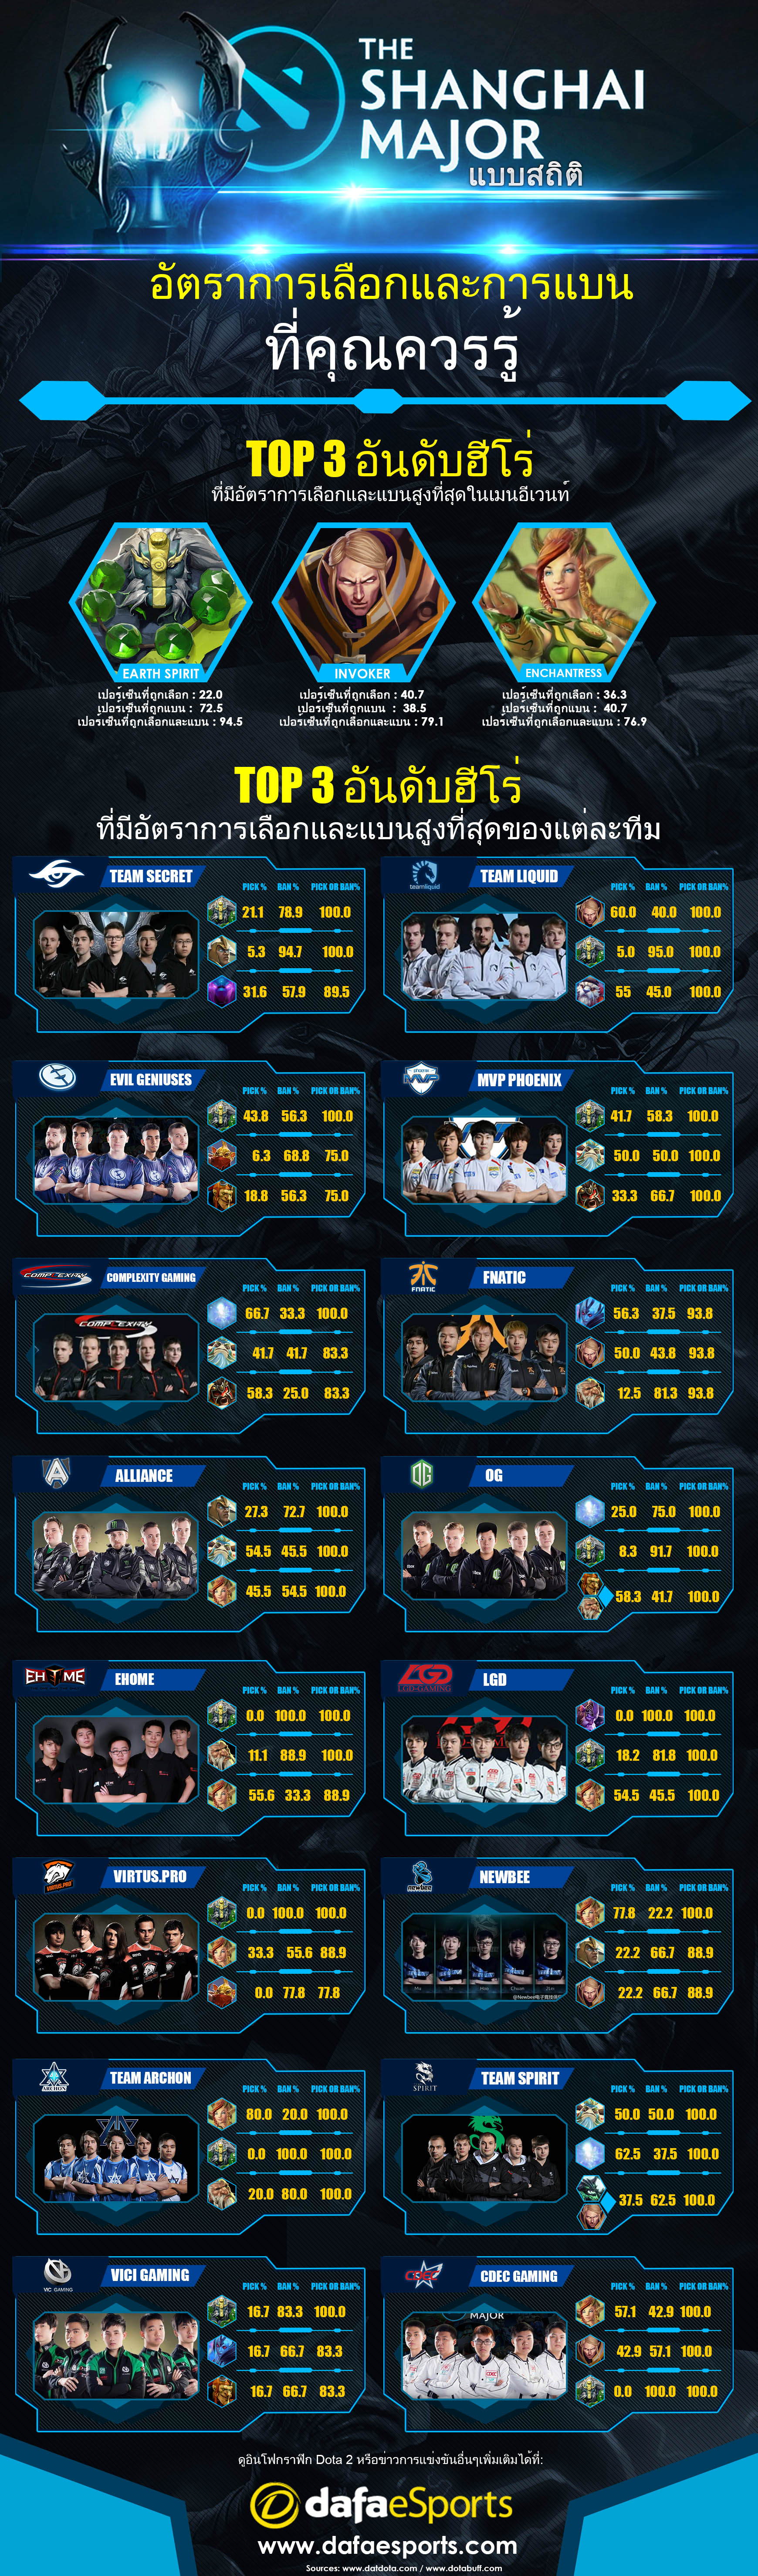 Shanghai Major Pick and Ban rates infographic